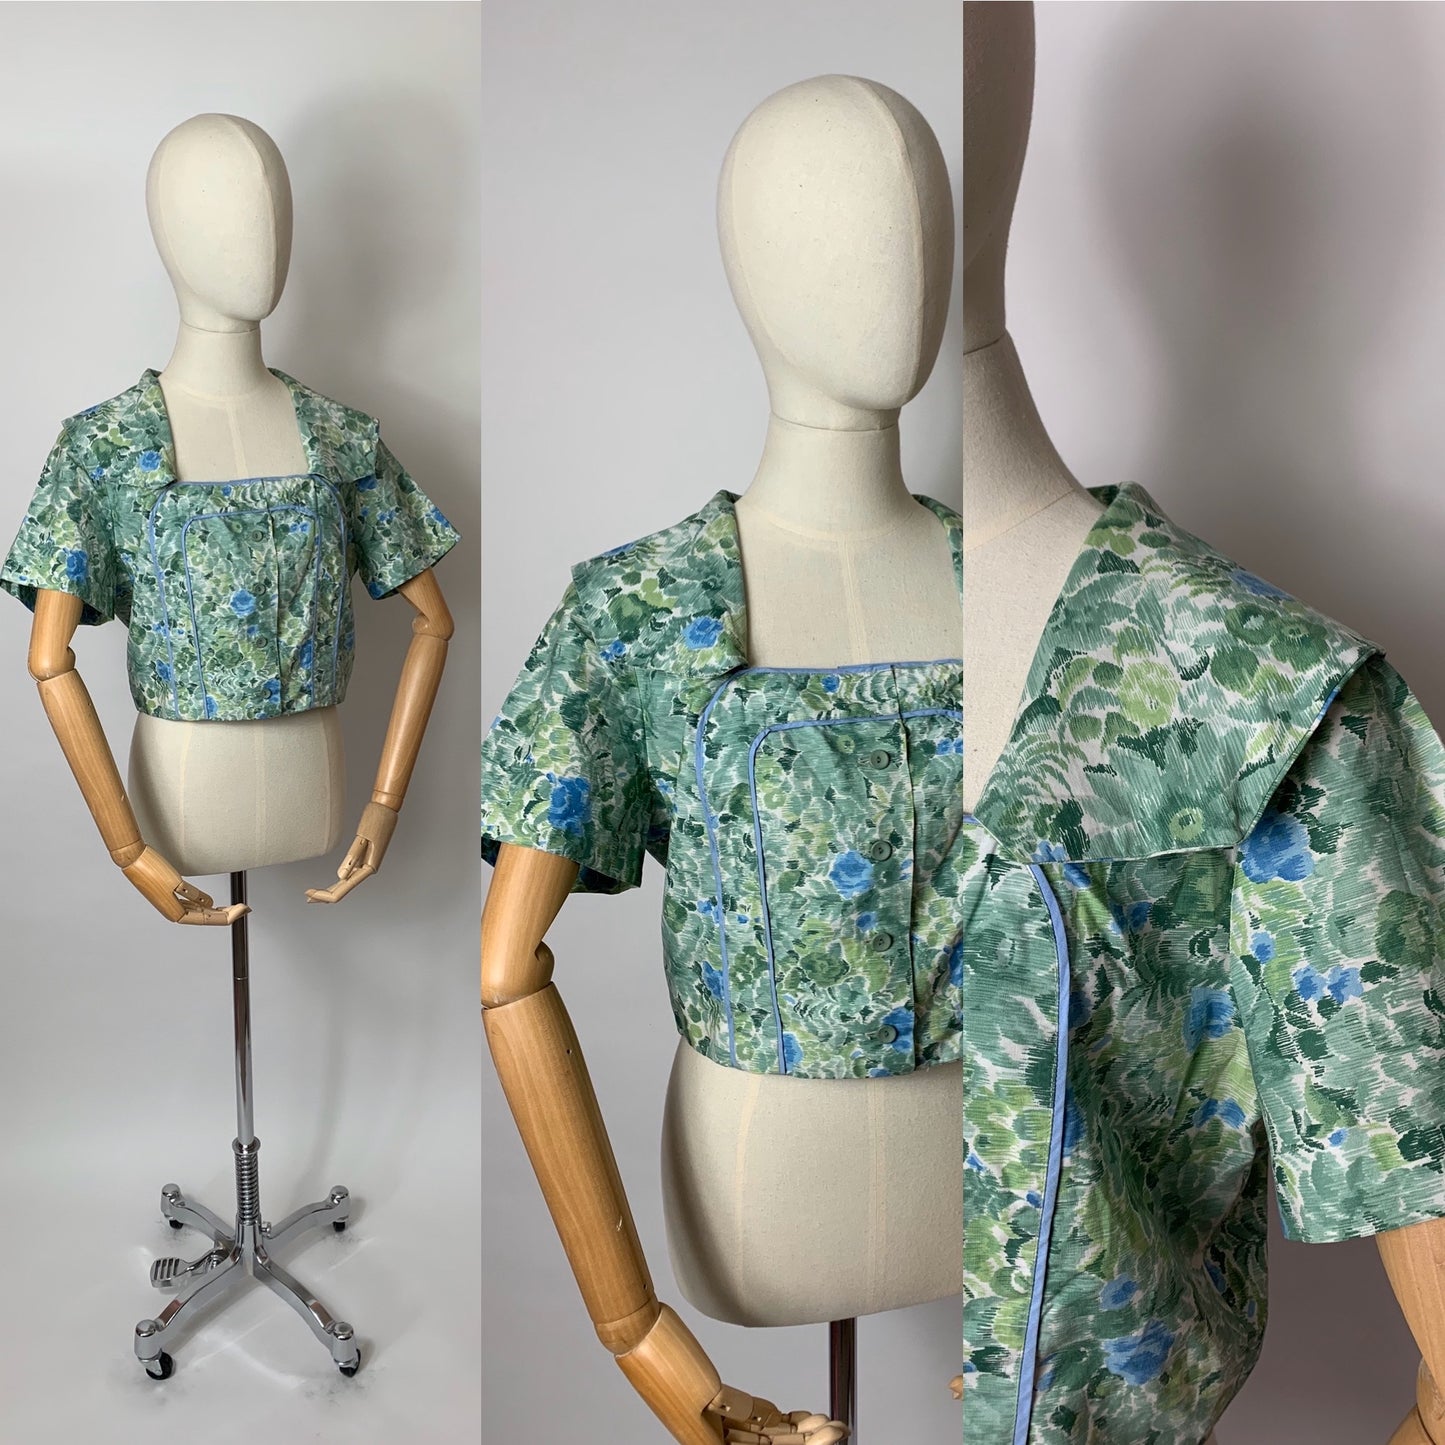 Original 1950s Horrockses Fashions Jacket / Bolero - In a Lovely Summertime Floral